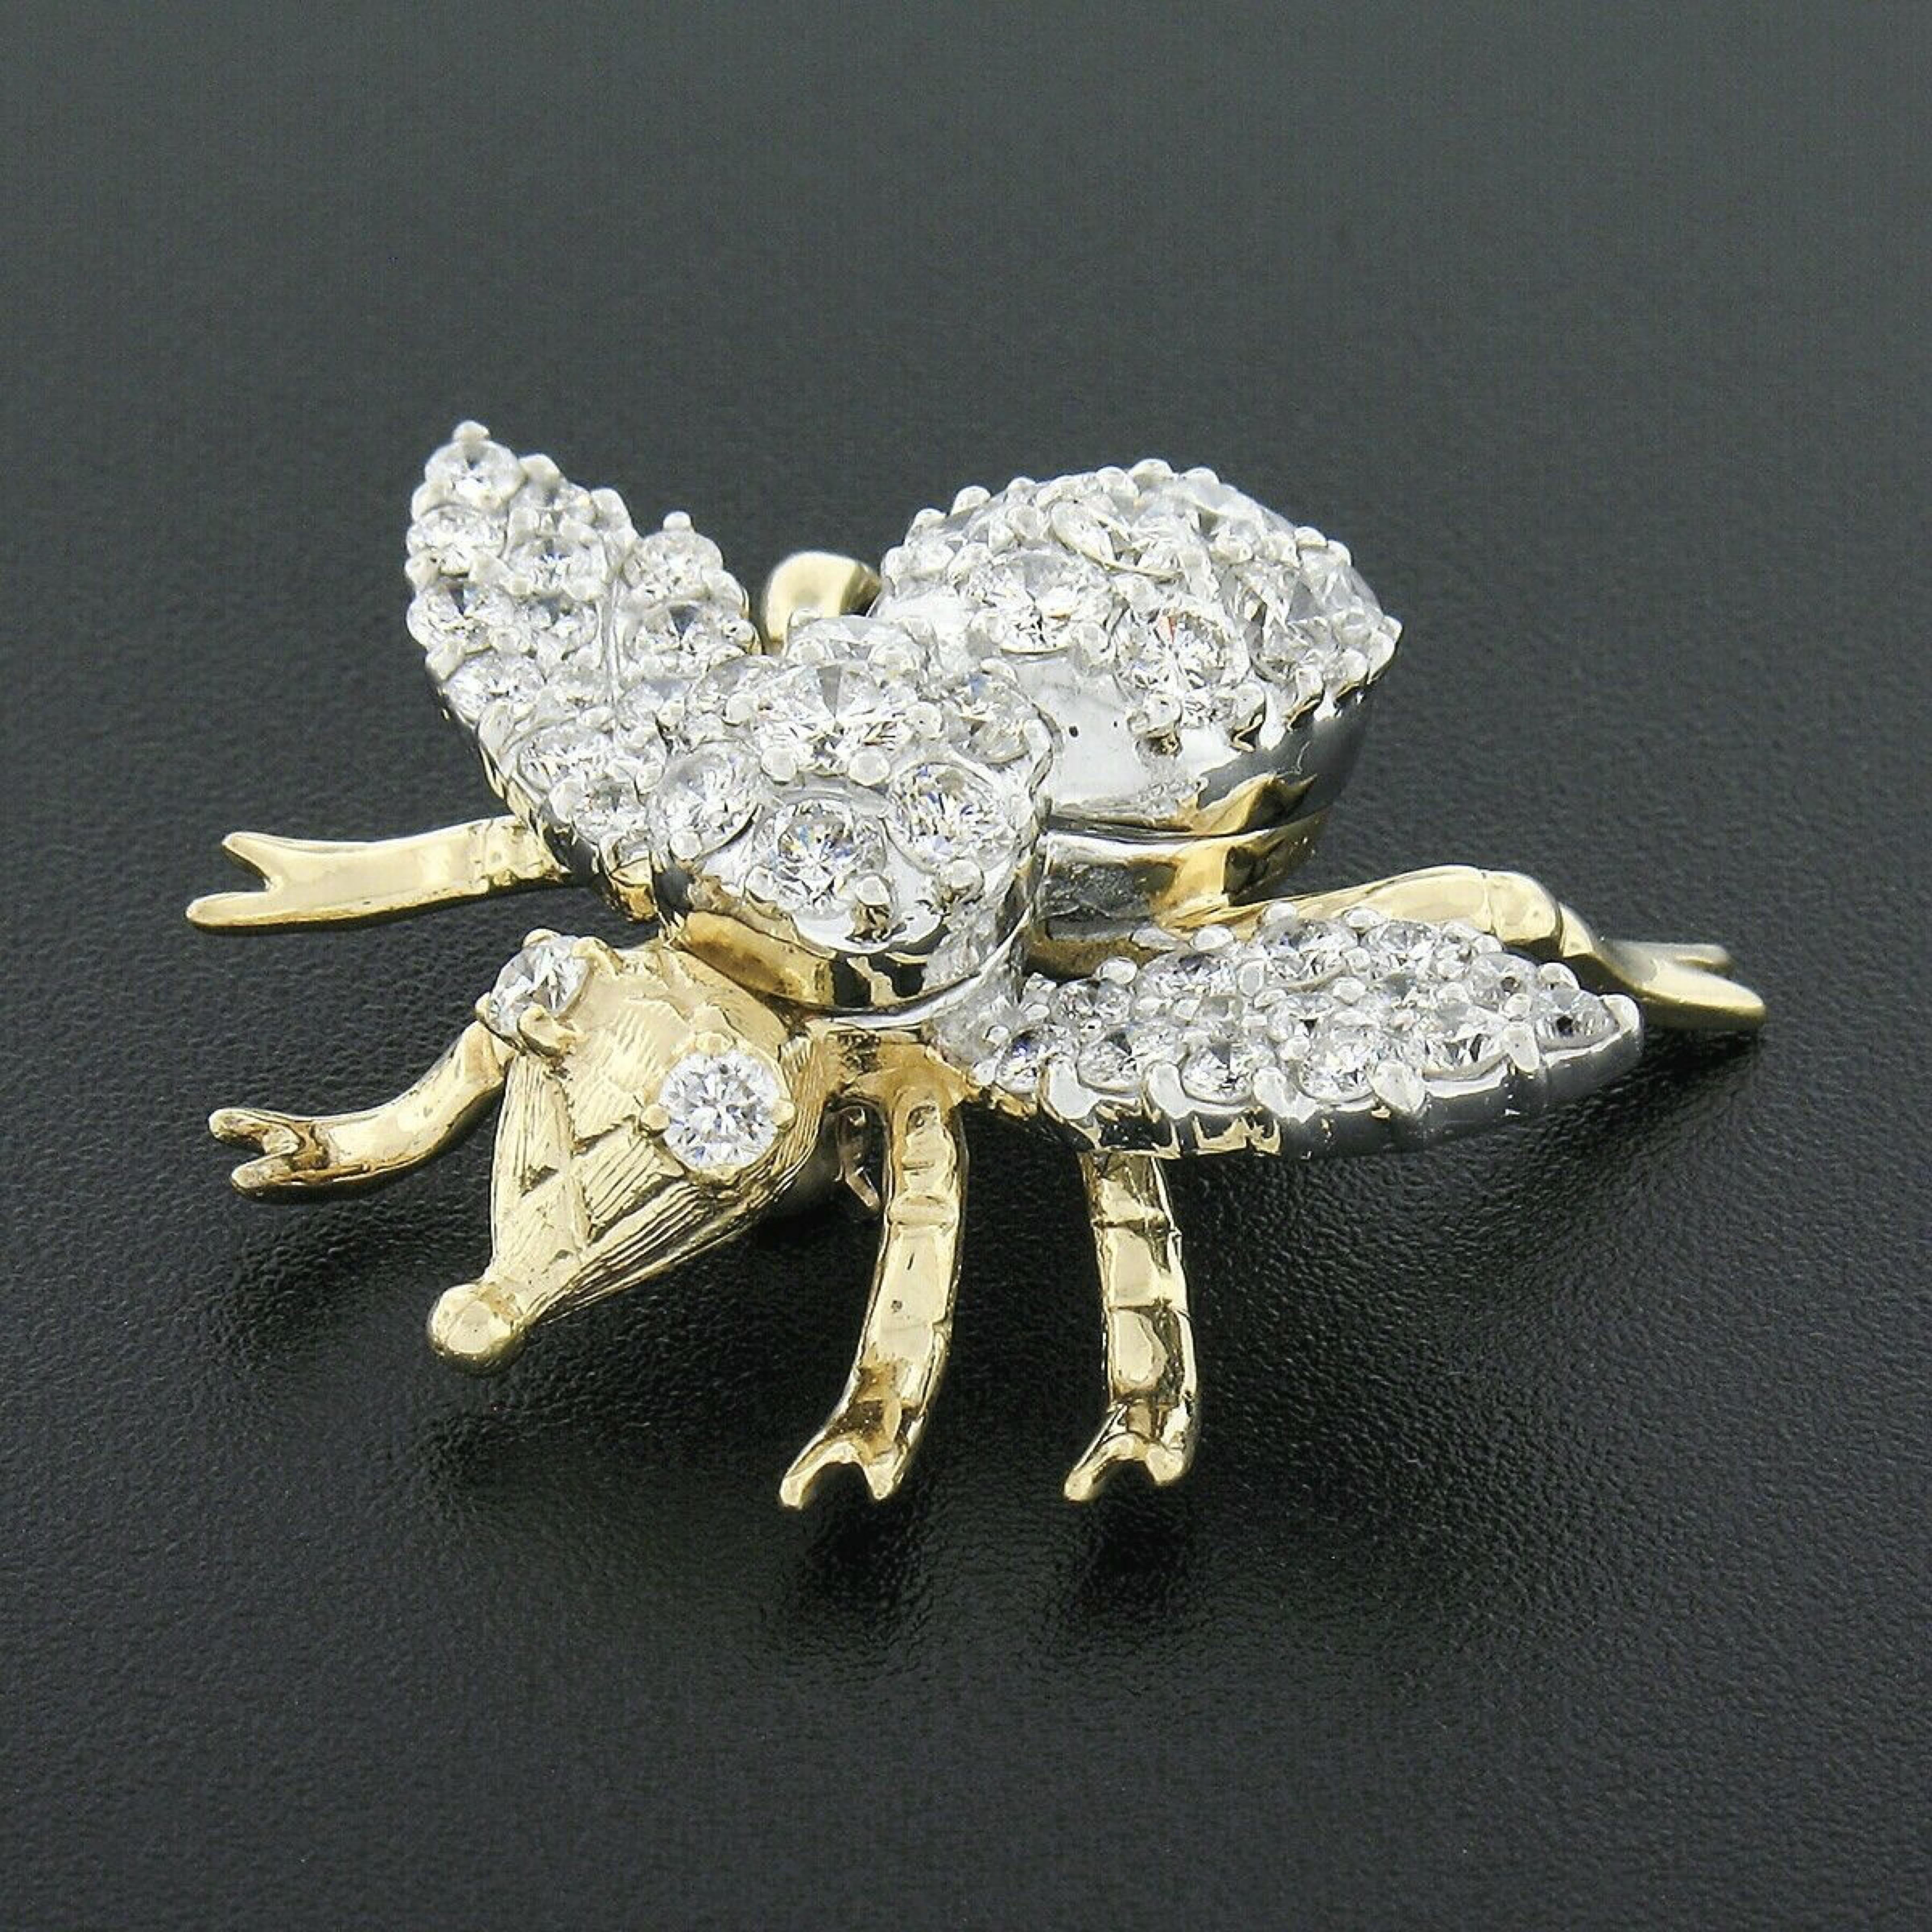 Here we have an absolutely magnificent vintage brooch that was crafted from solid 14 yellow and white gold. It features a large and nicely detailed fly/bee insect design that is drenched with fine diamonds totaling approximately 3 carats in weight.